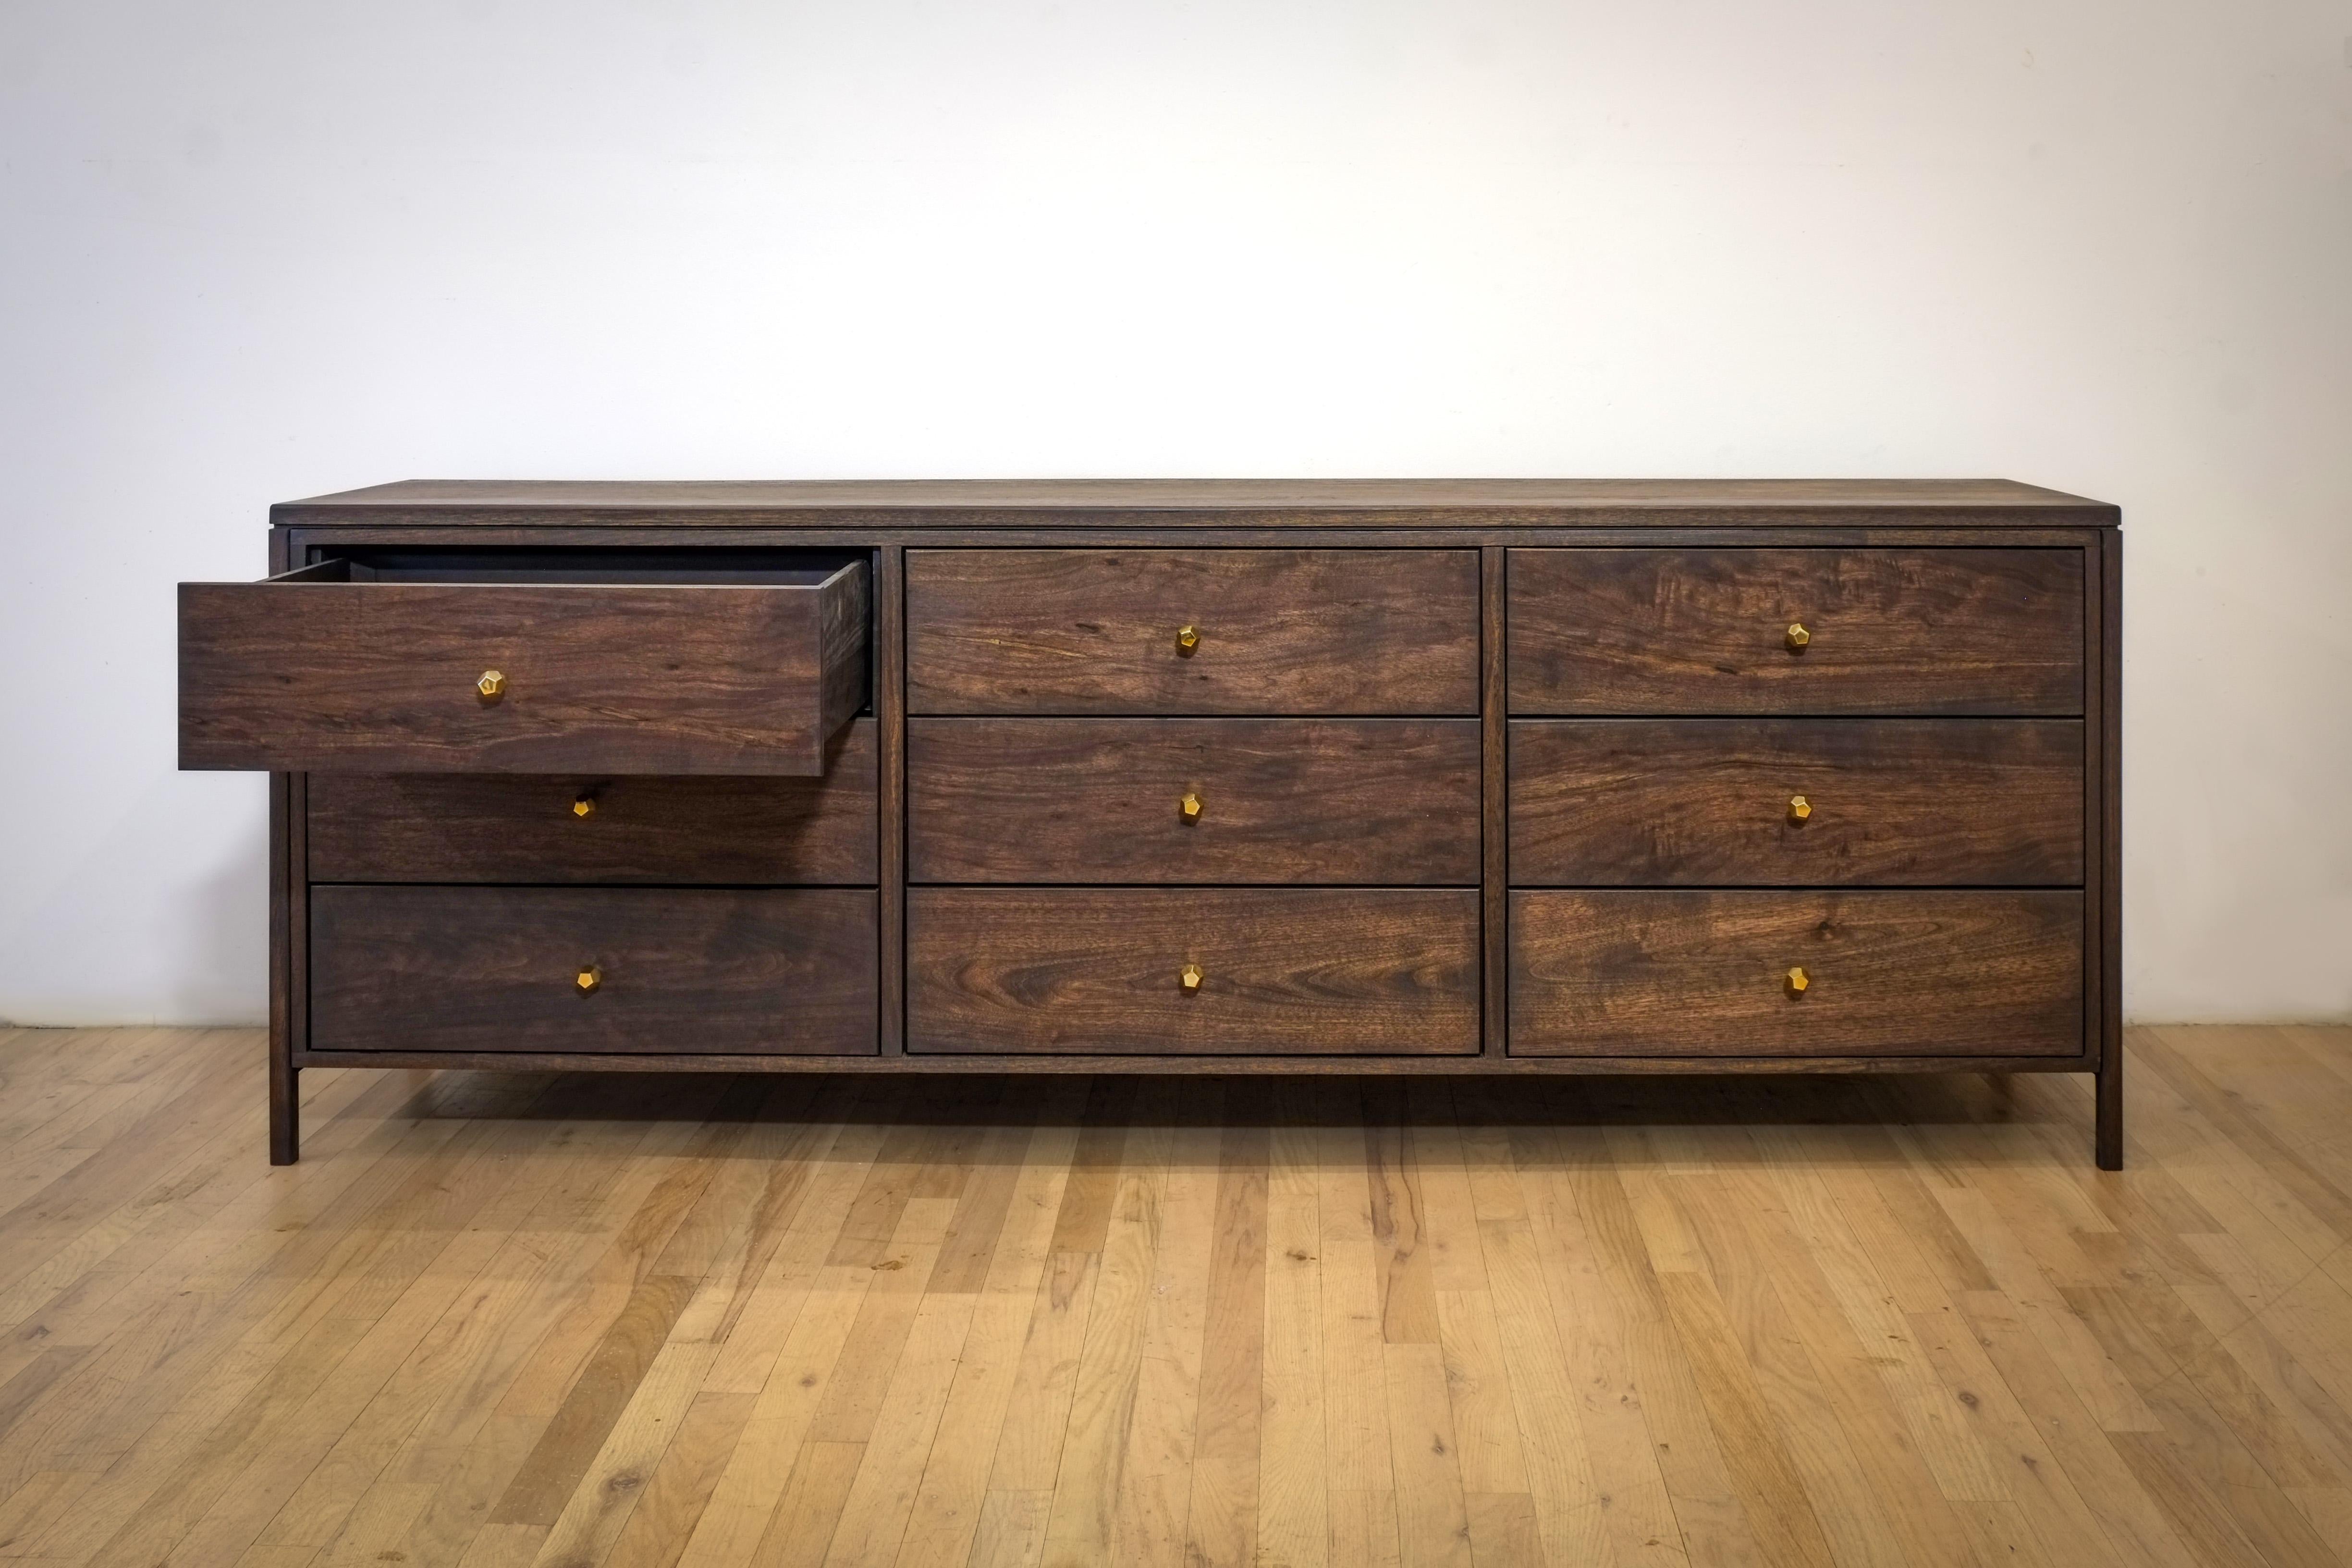 Minimalist Walnut Dresser Continuous Grain Drawer Fronts Bookmatched For Sale